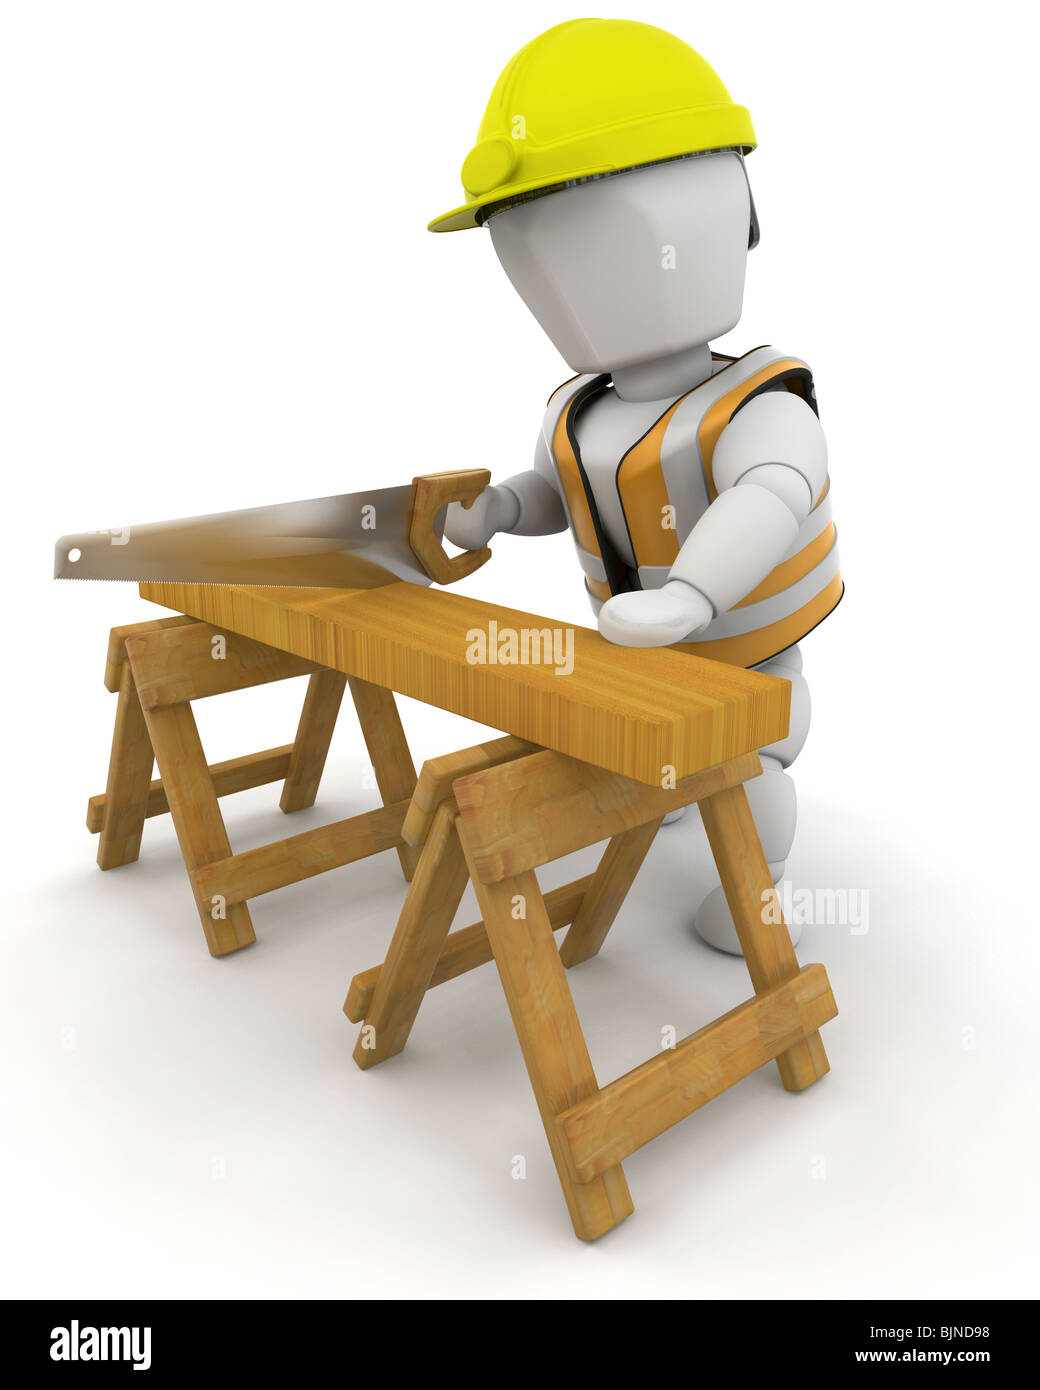 3D Render of a man sawing wood Stock Photo